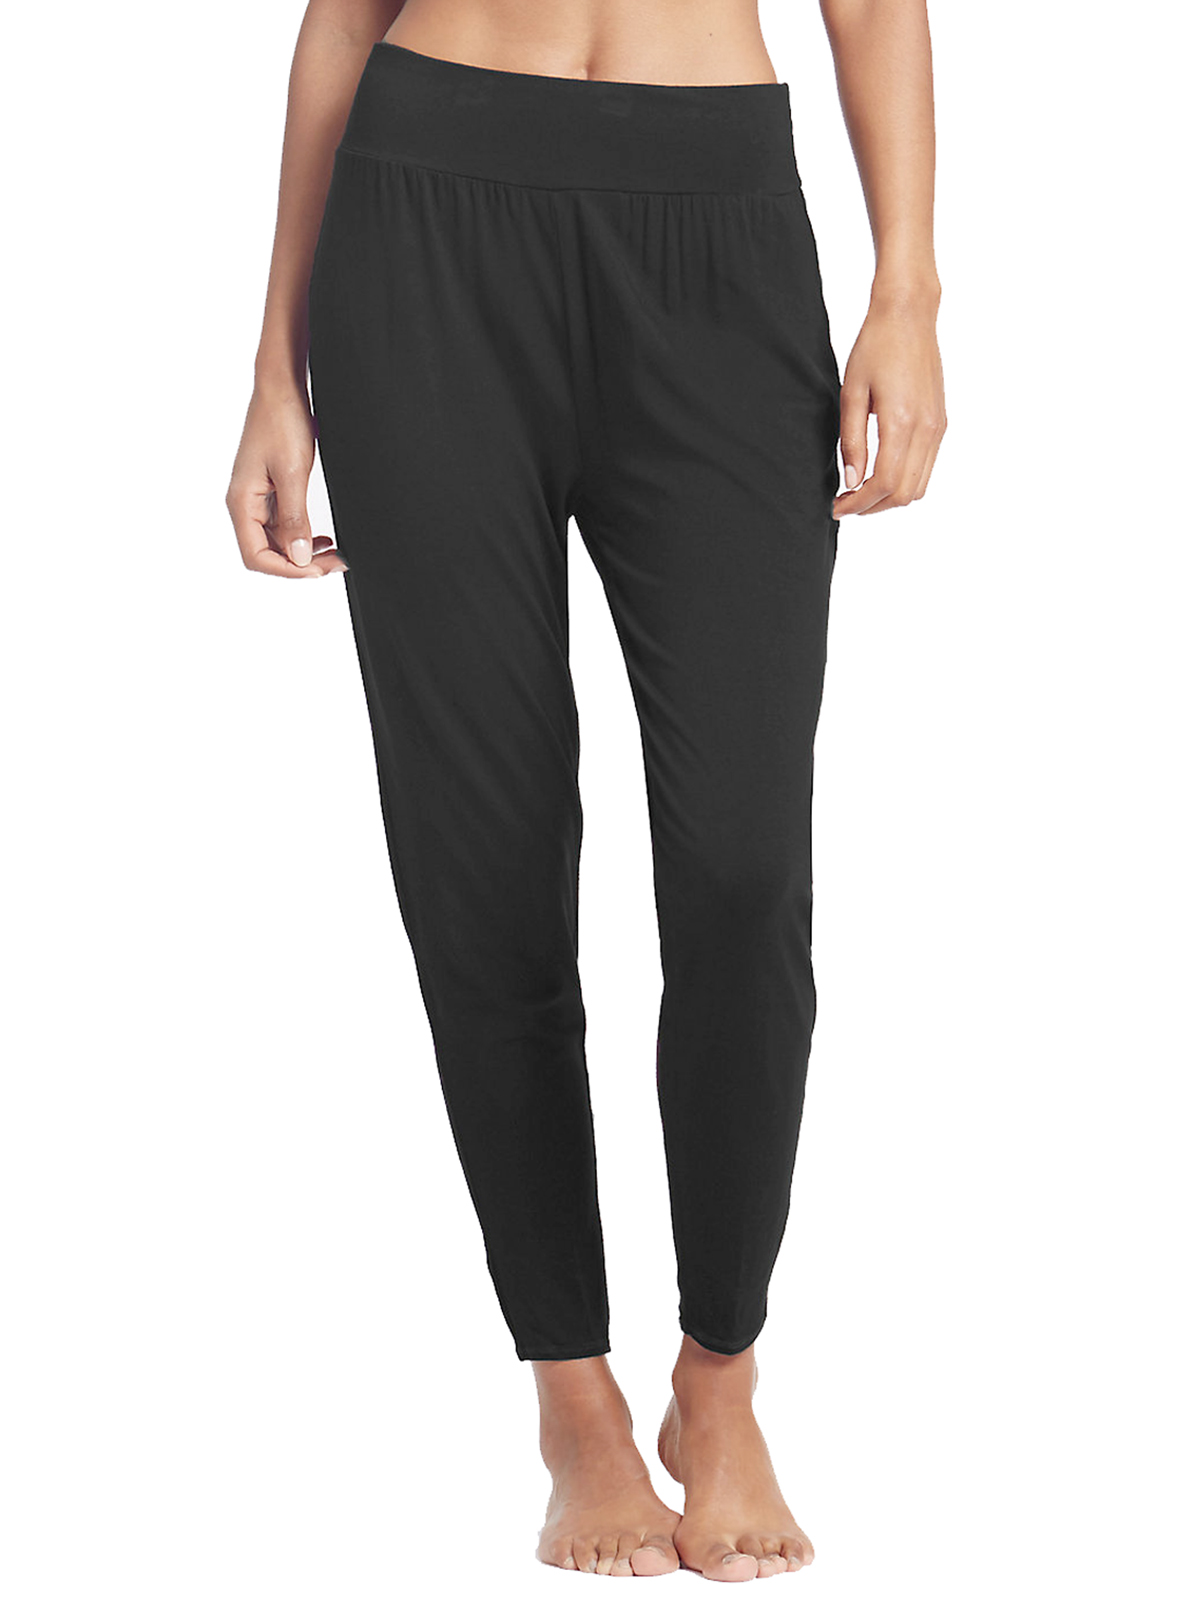 Marks and Spencer - - M&5 BLACK Cool Comfort Quick Dry Yoga Bottoms ...